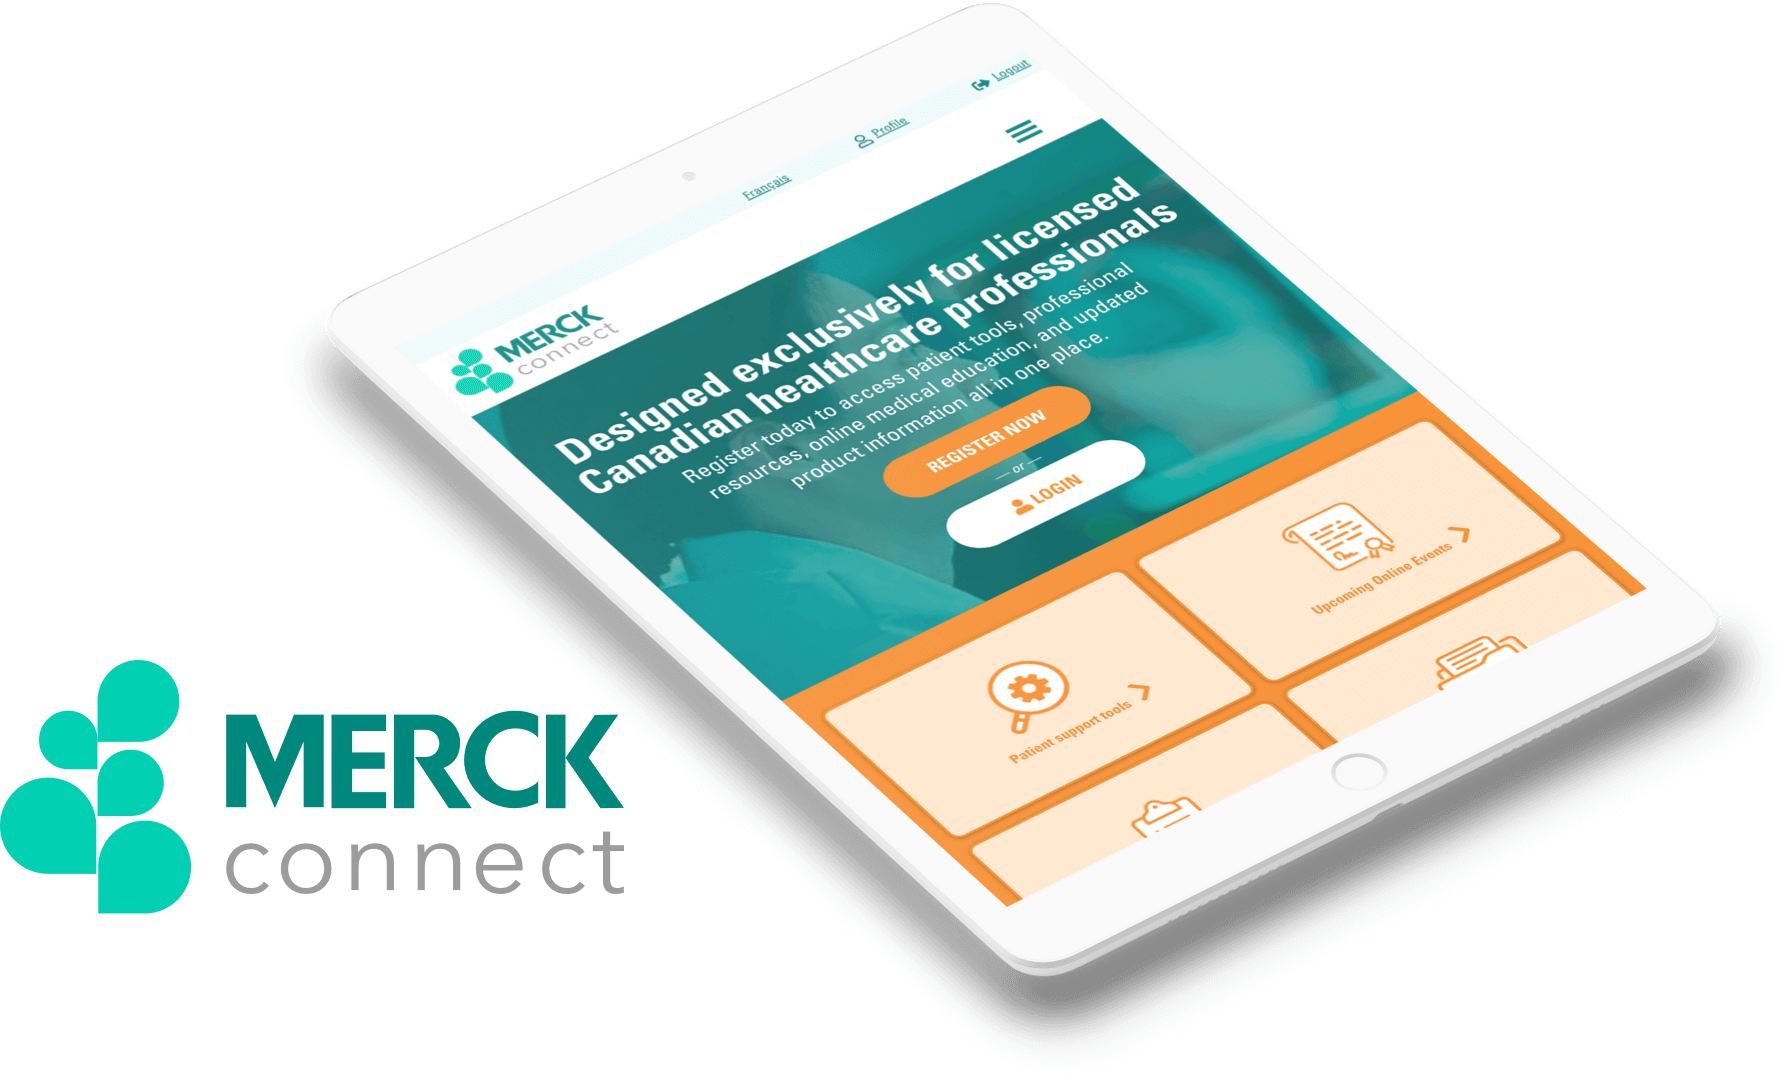 Merck Connect on tablet